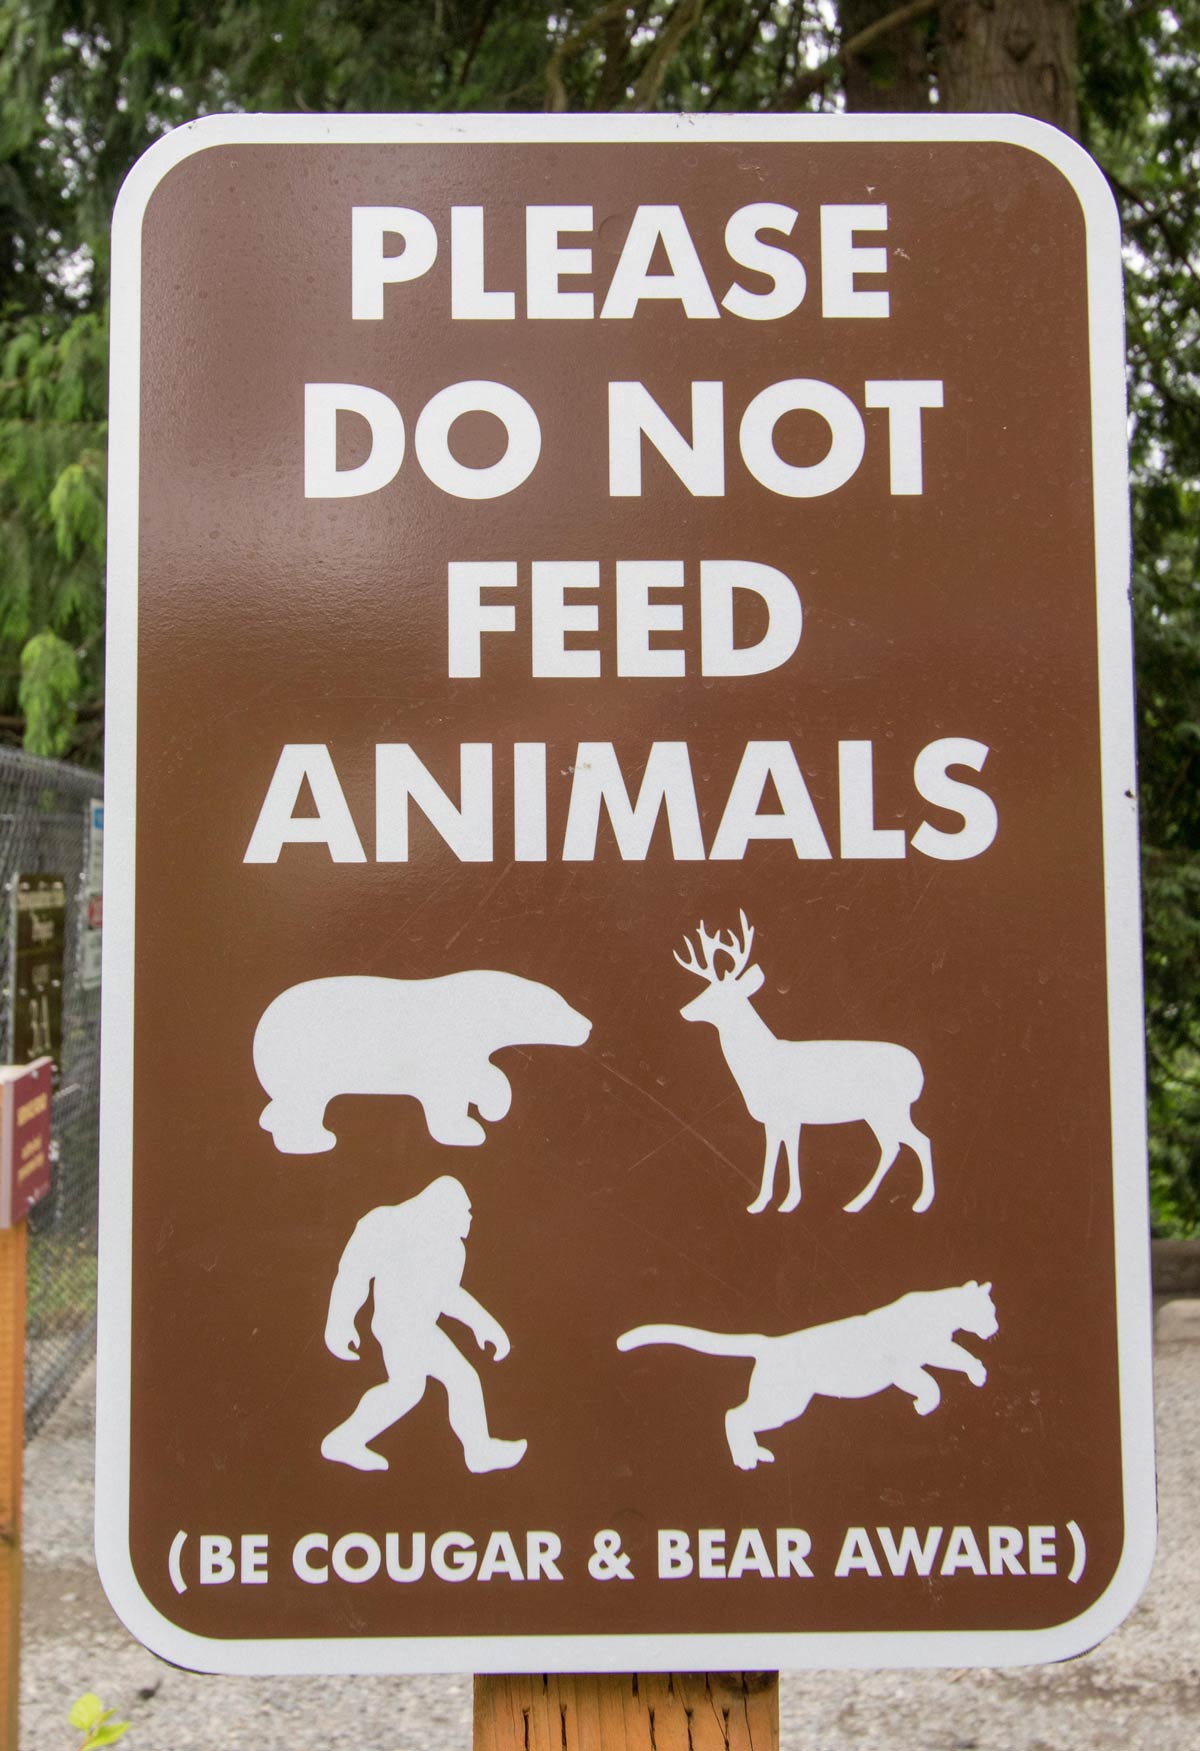 Do not feed the what?!